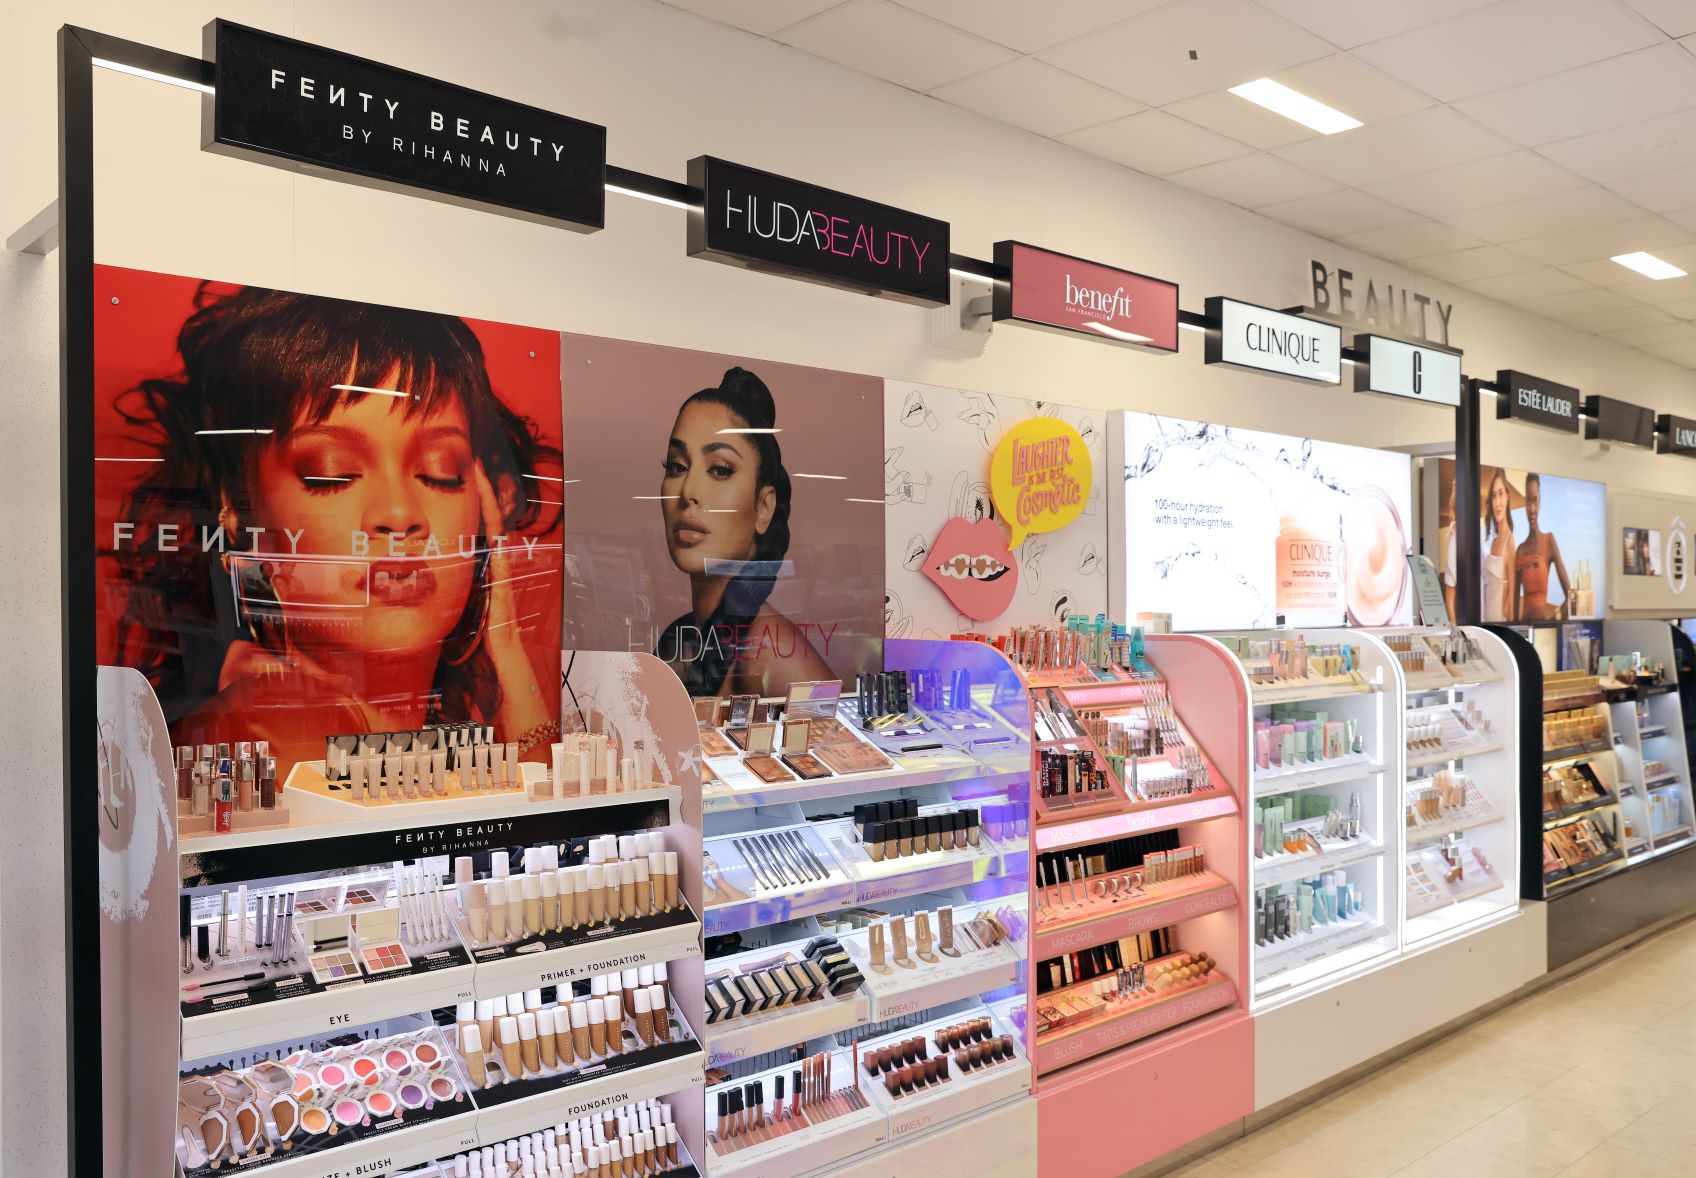 Boots has introduced beauty halls into stores